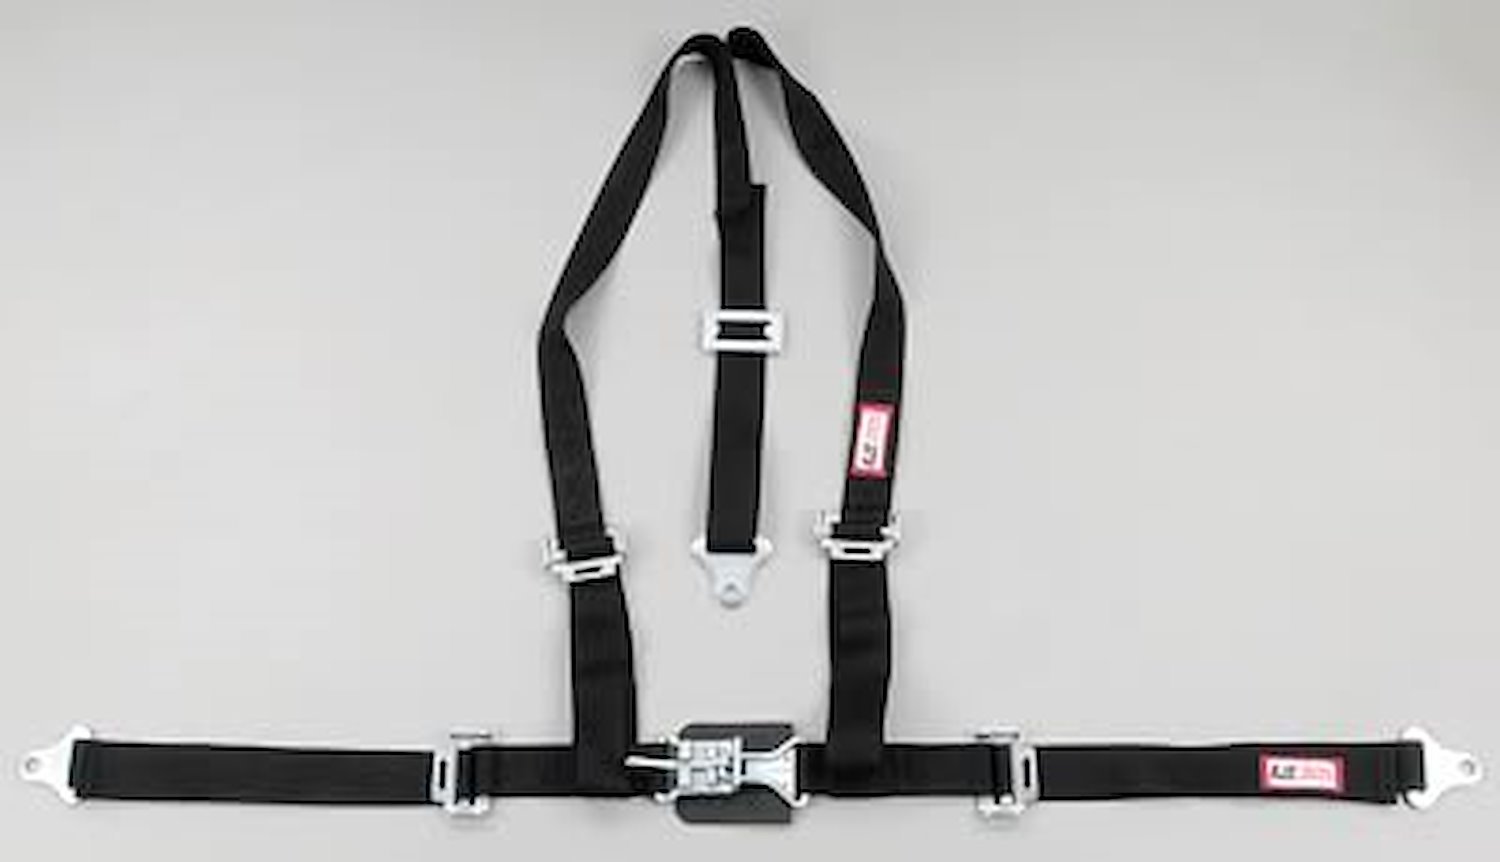 NON-SFI L&L HARNESS 3 PULL DOWN Lap BELT SEWN IN 2 S.H. Y FLOOR Mount ALL WRAP ENDS HOT PINK